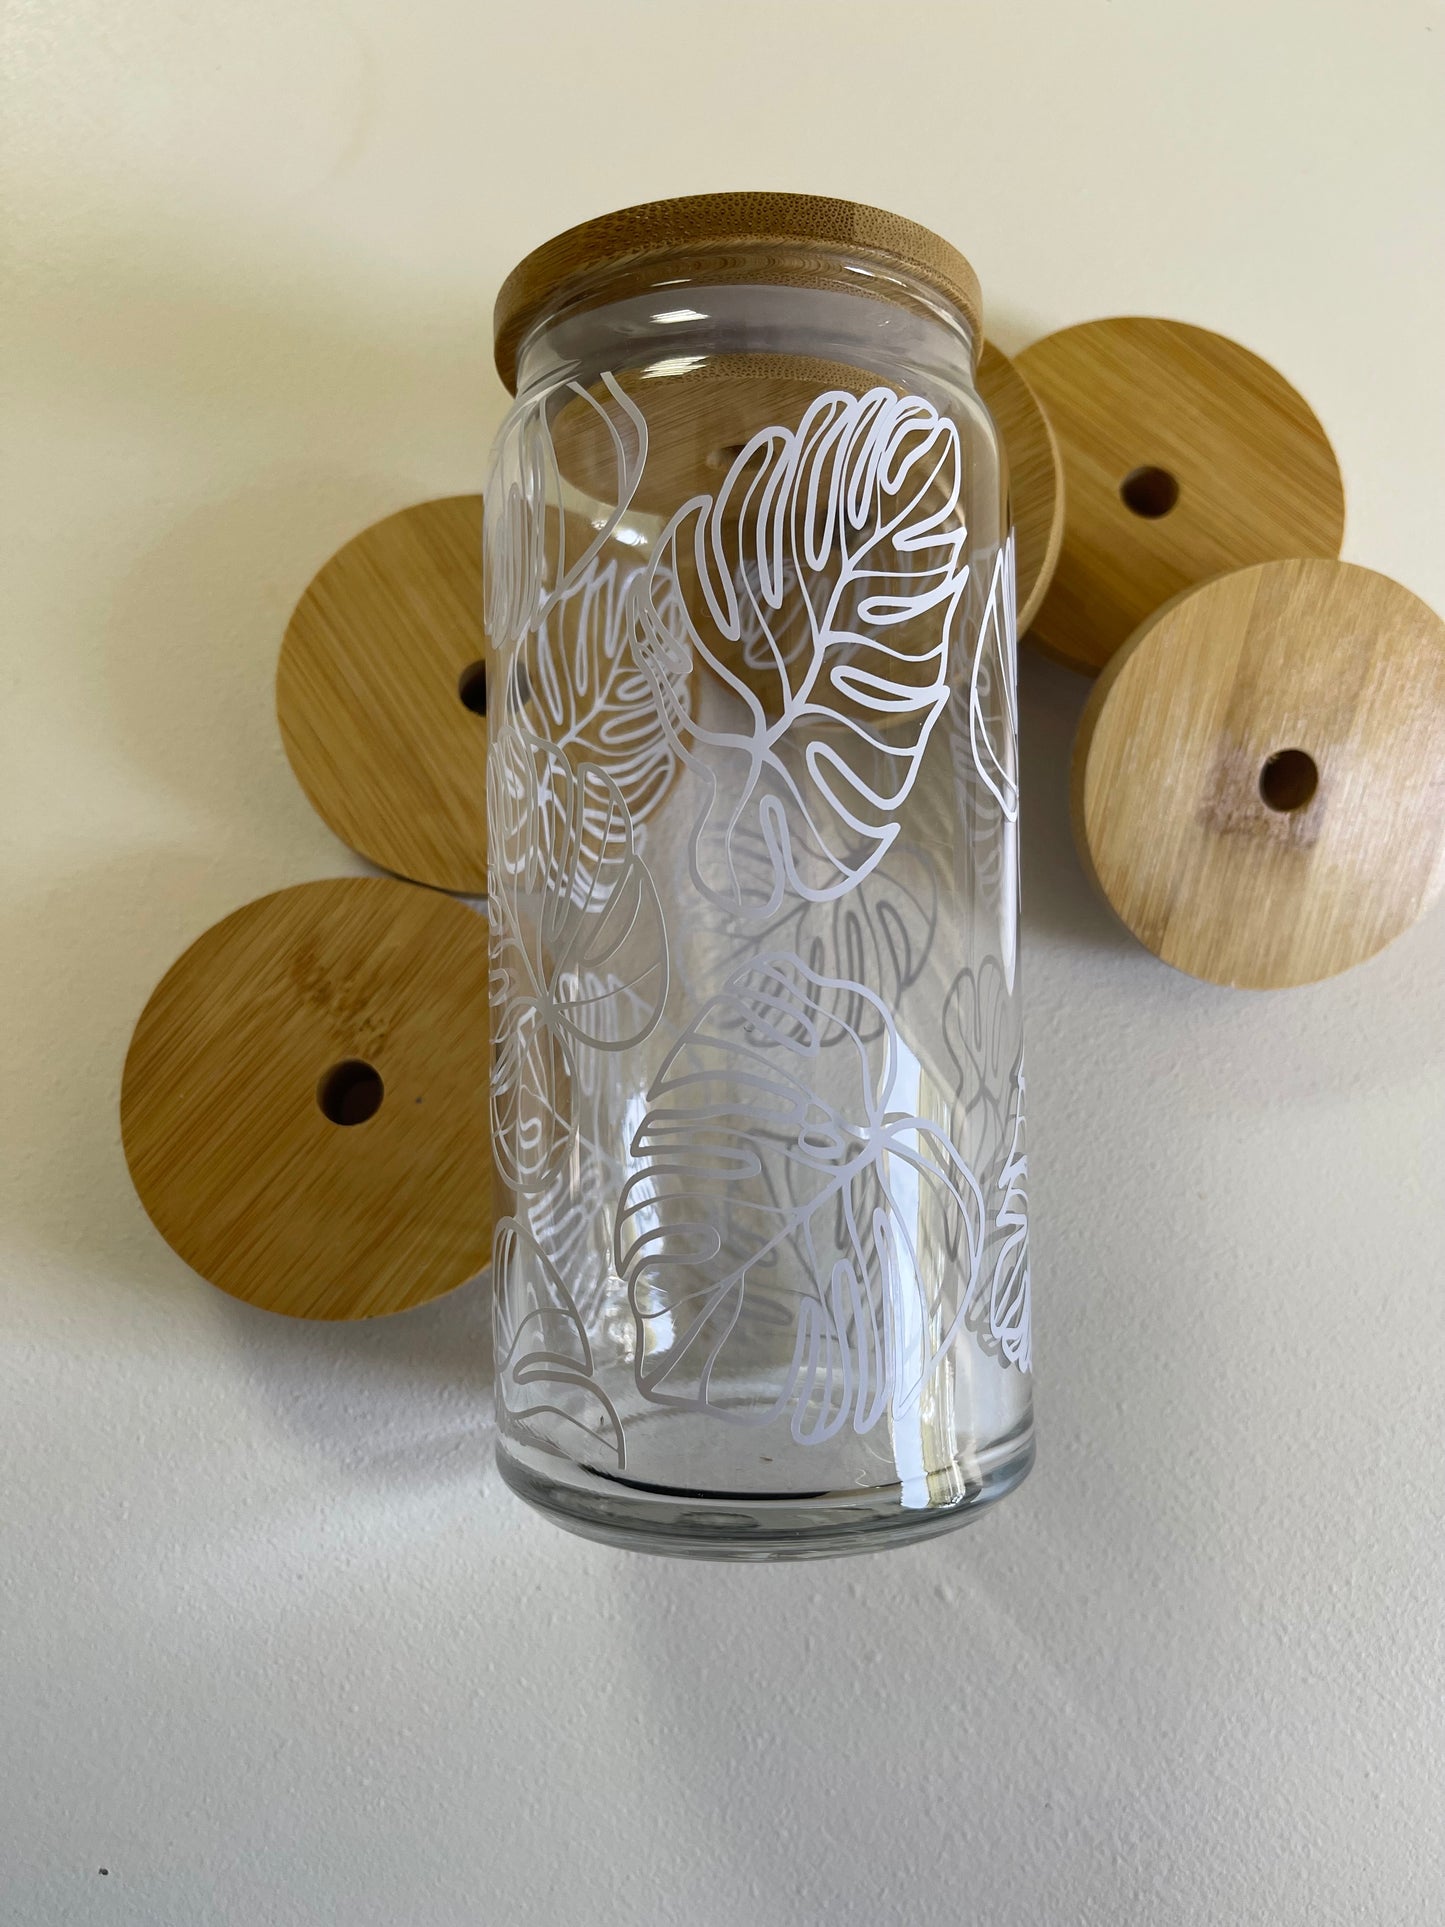  20 OZ Glass Cups with Bamboo Lids and Straws - Beer